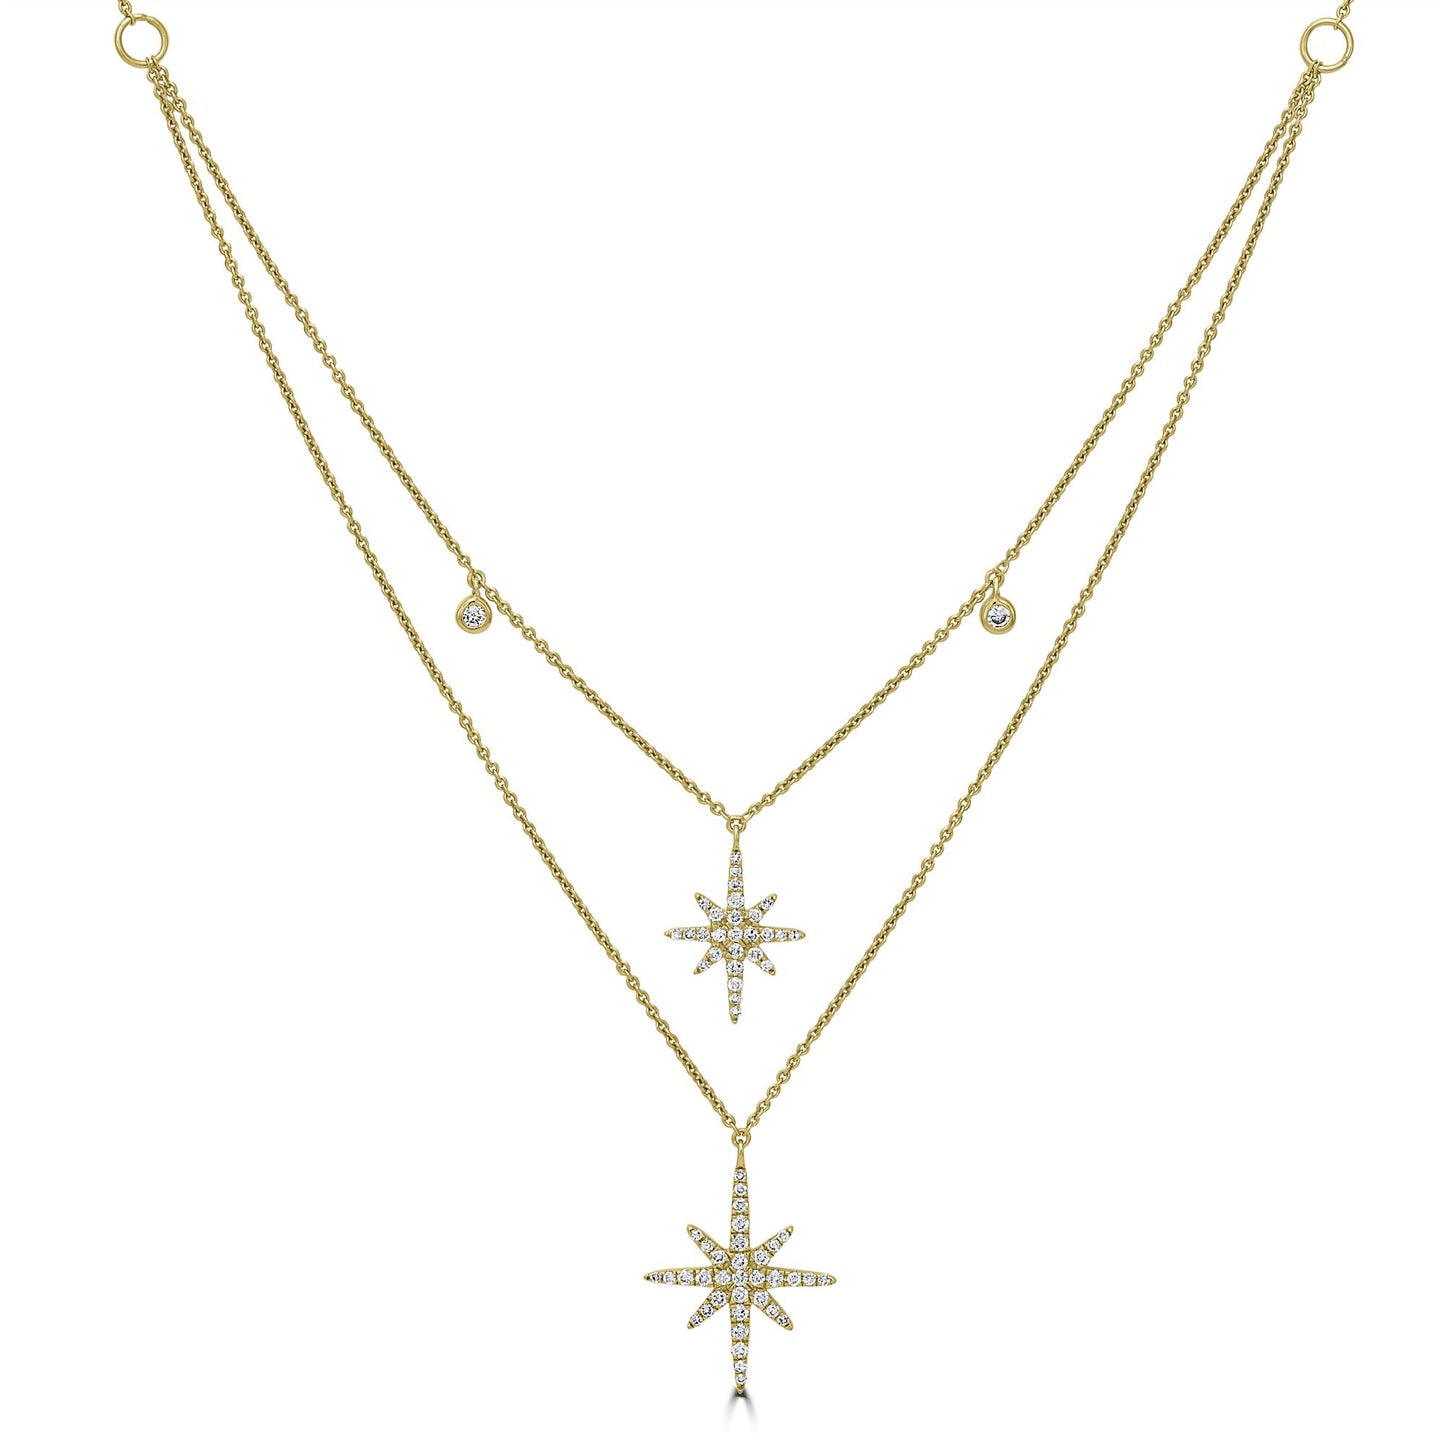 The Stardust Necklace